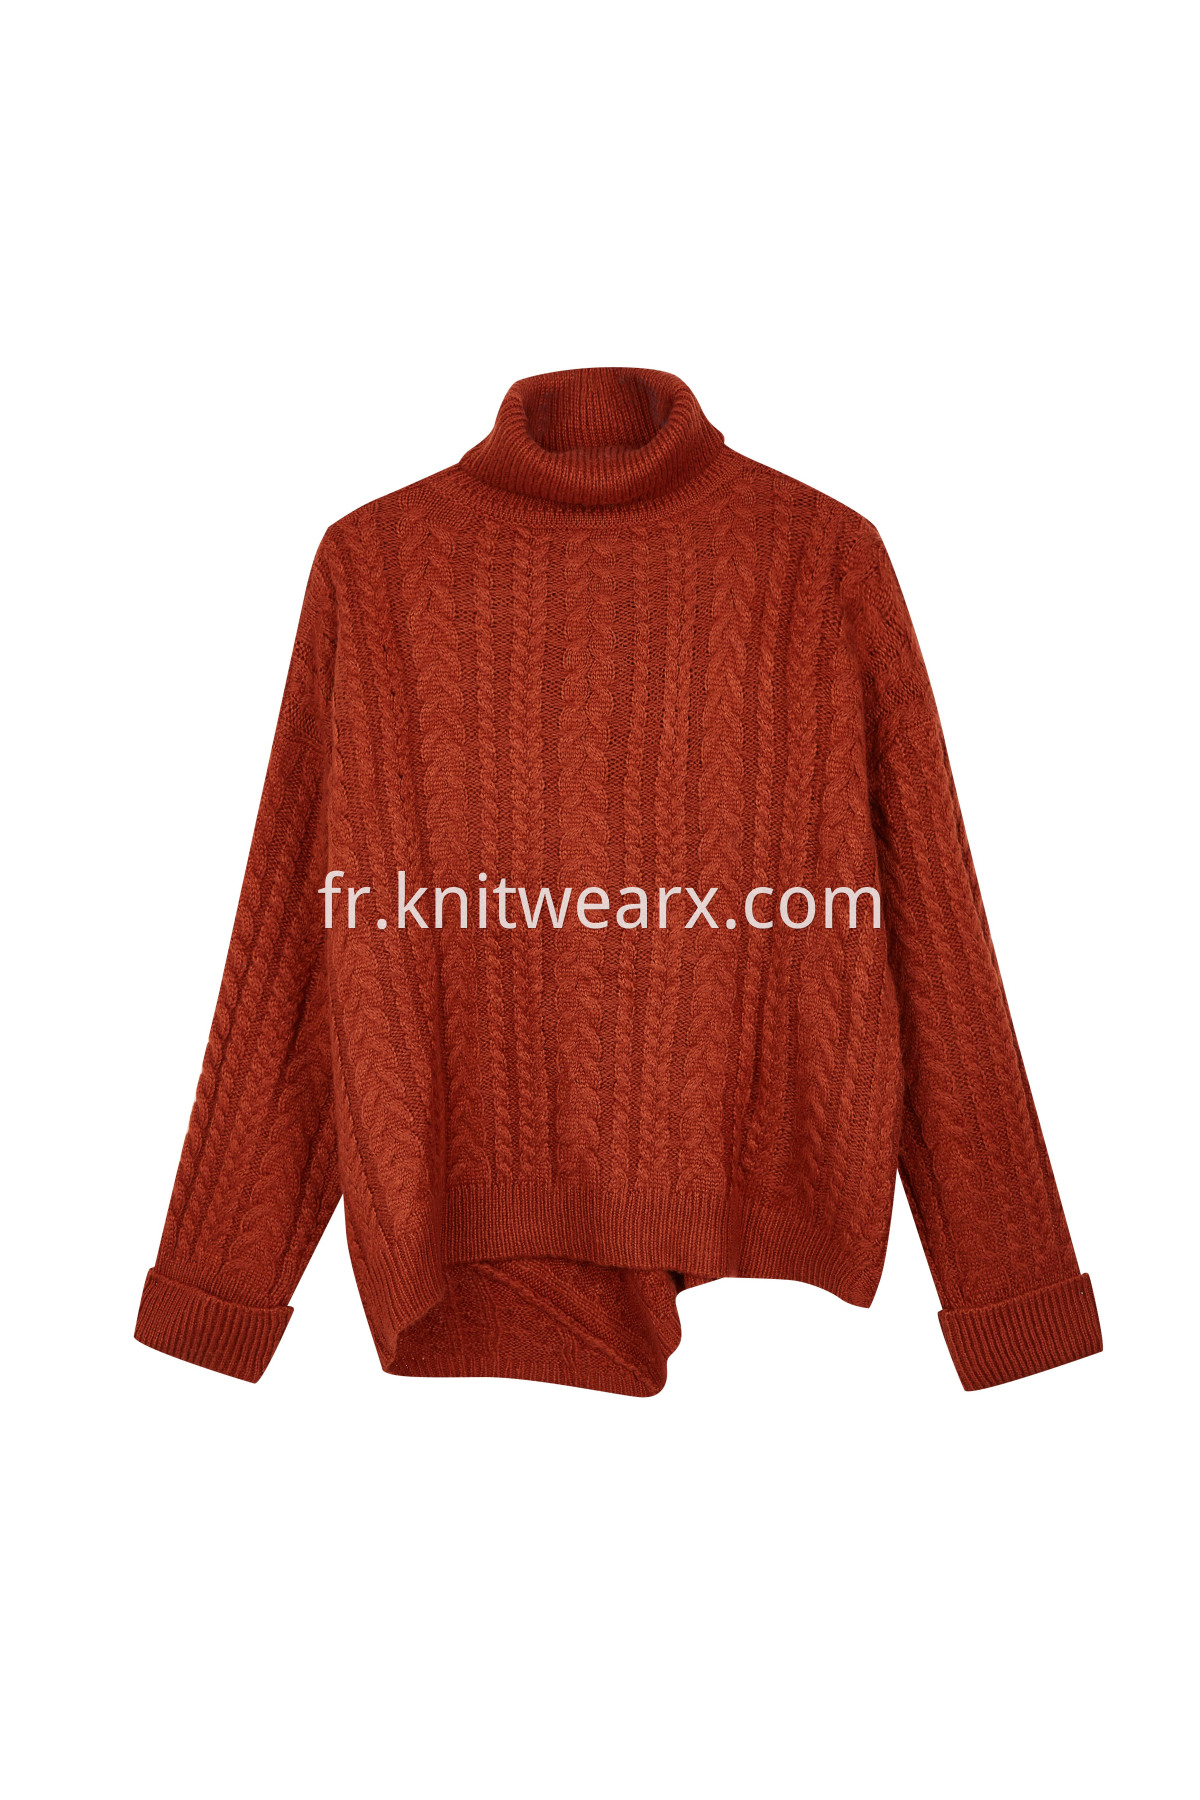 Women's Casual Turtleneck Loose Chunky Cable Knit Pullover Sweater Outerwear